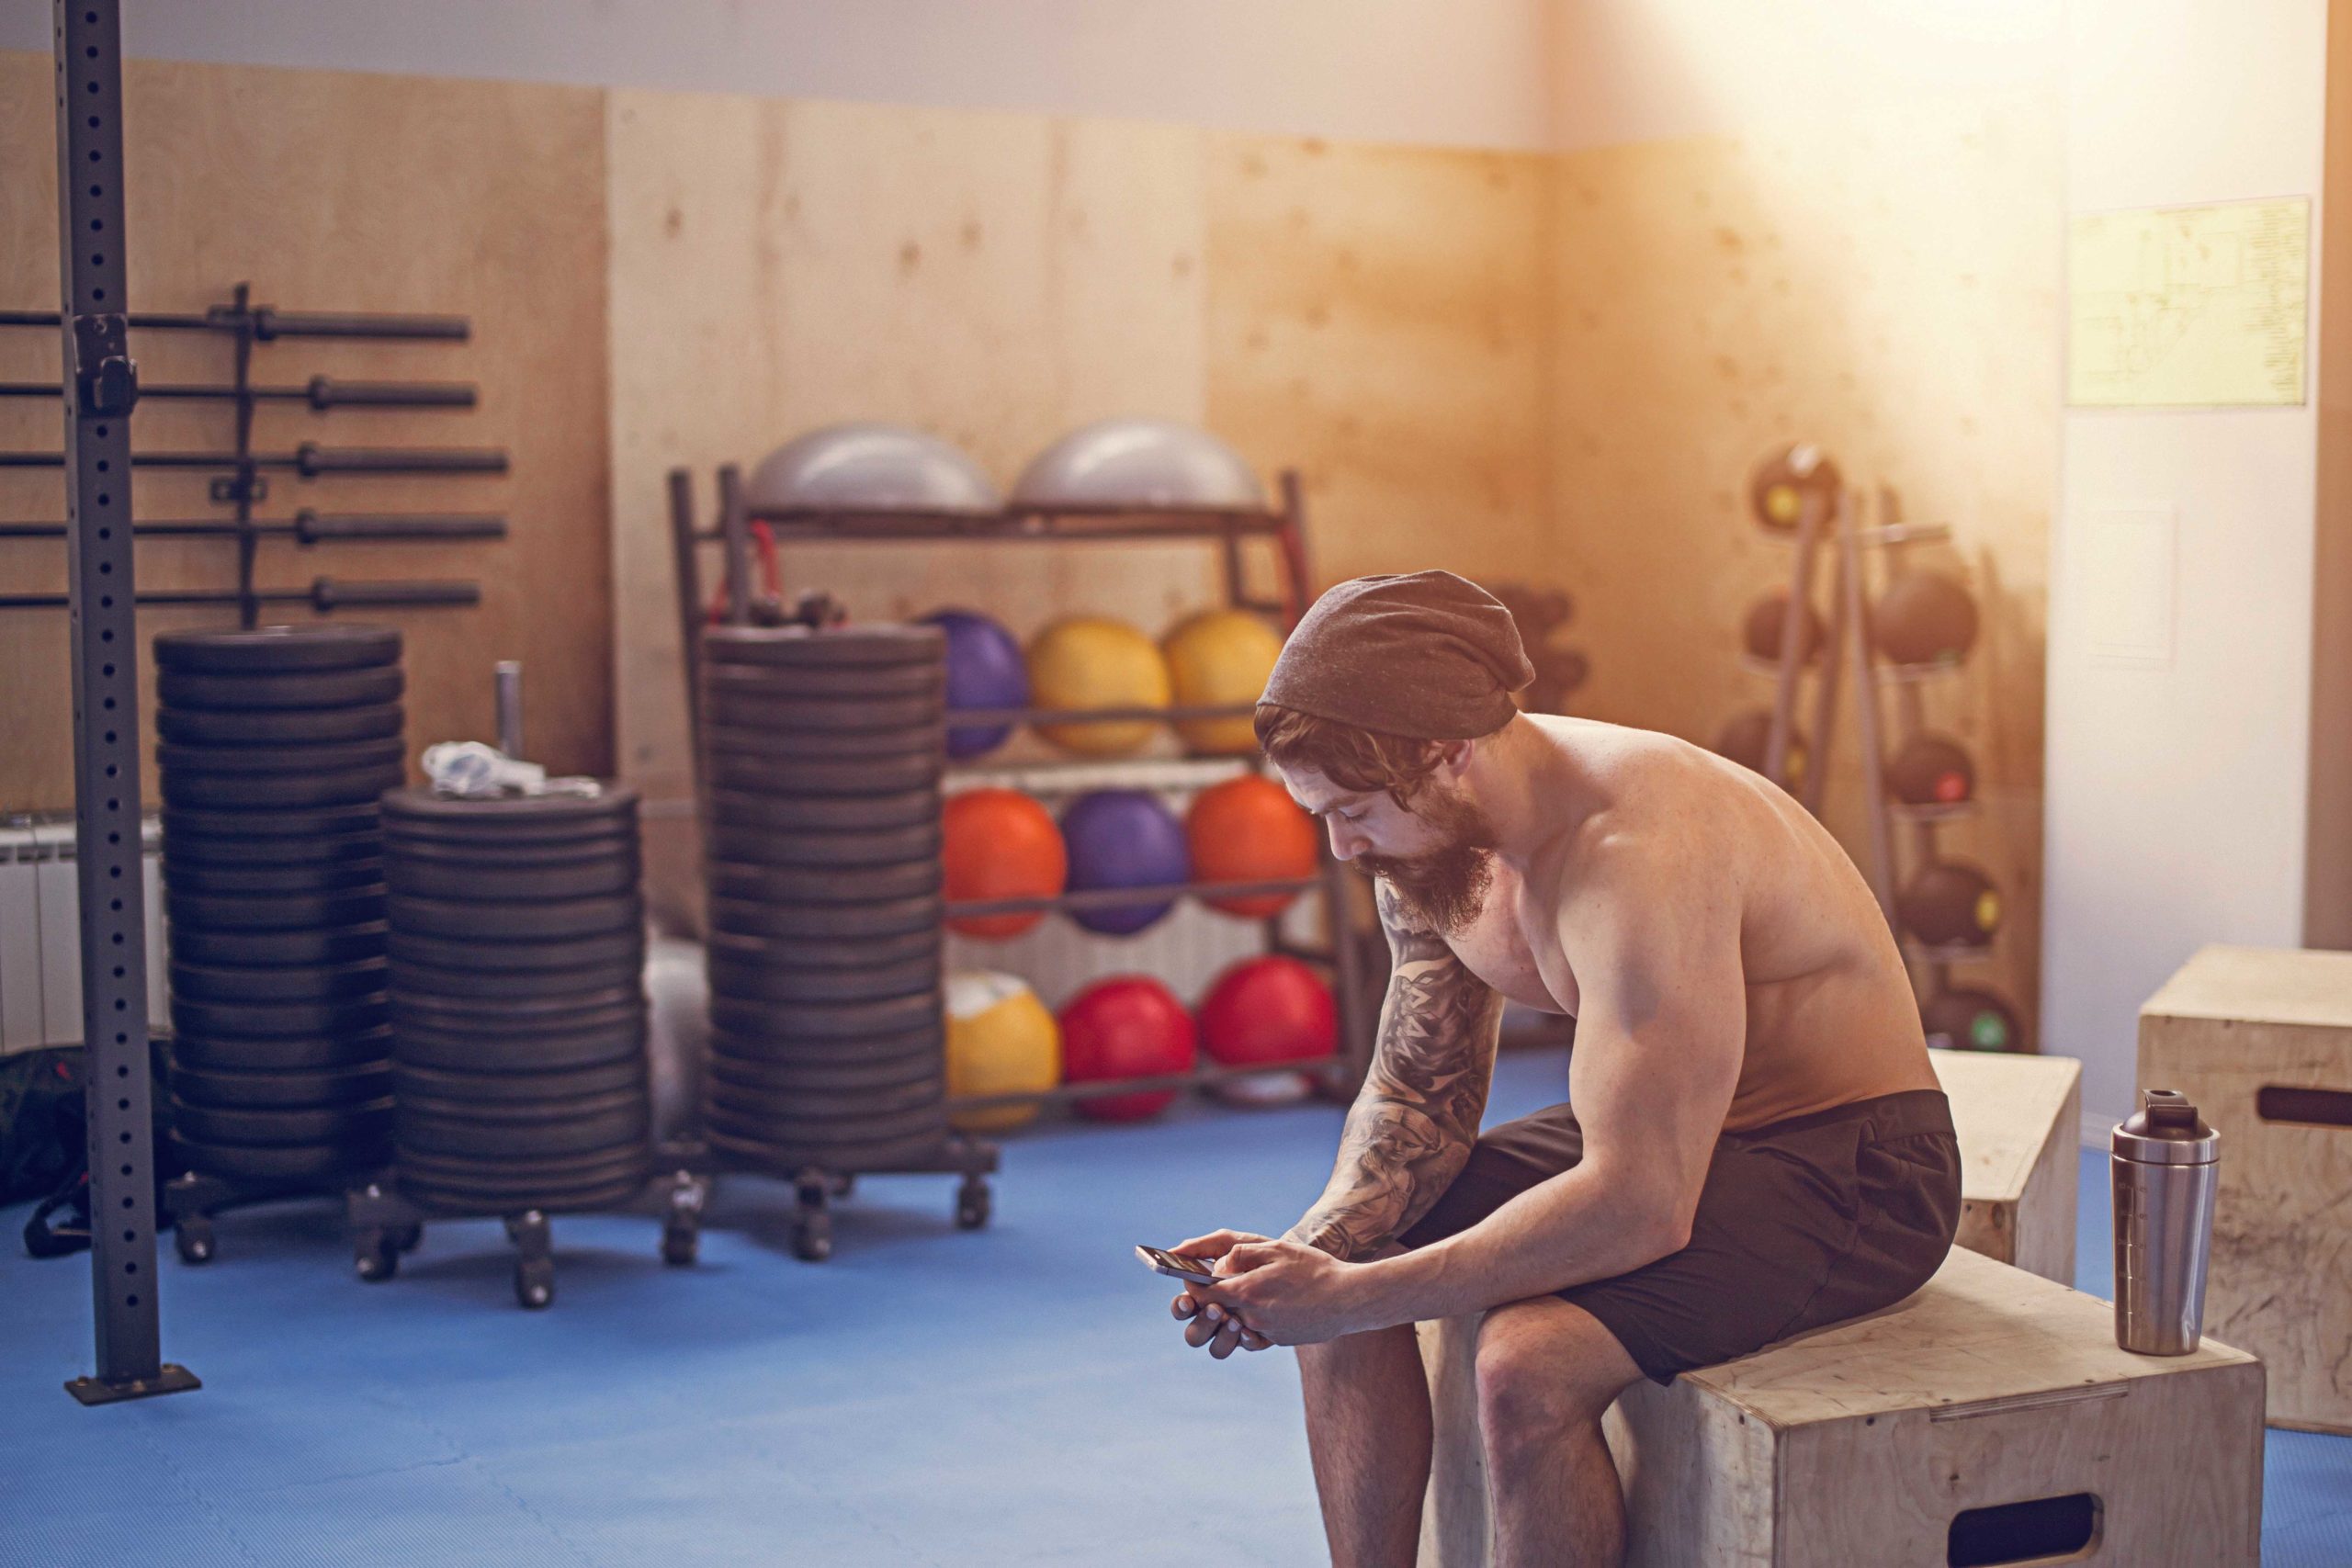 Muscular young athletic built athlete taking a break from hard workout